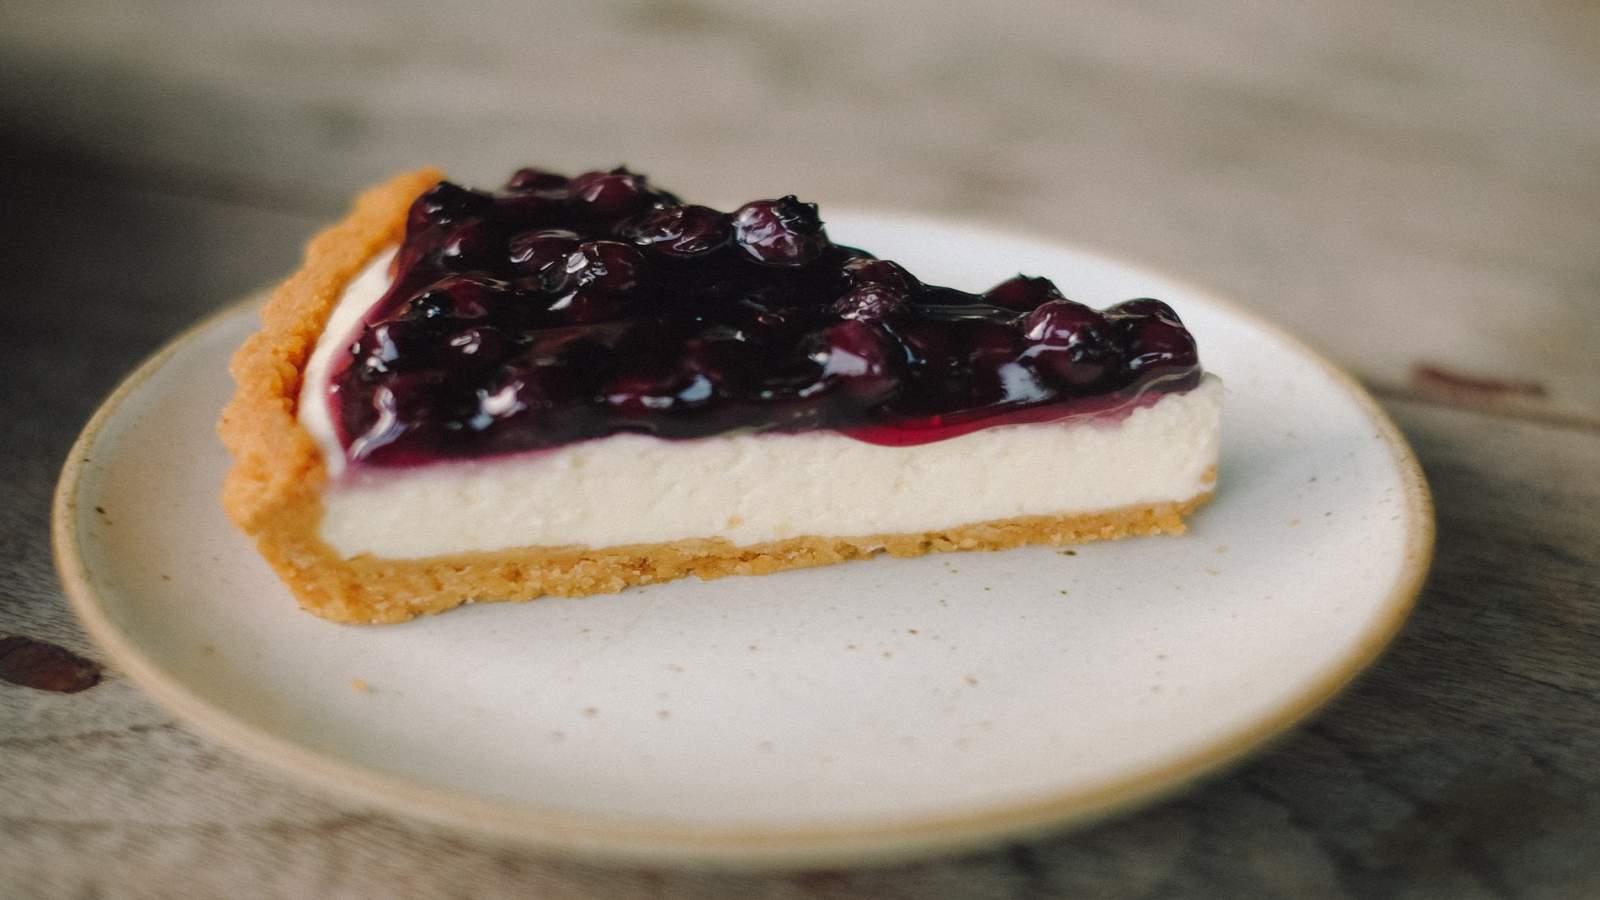 A tasty place to celebrate National Cheesecake Day in the D